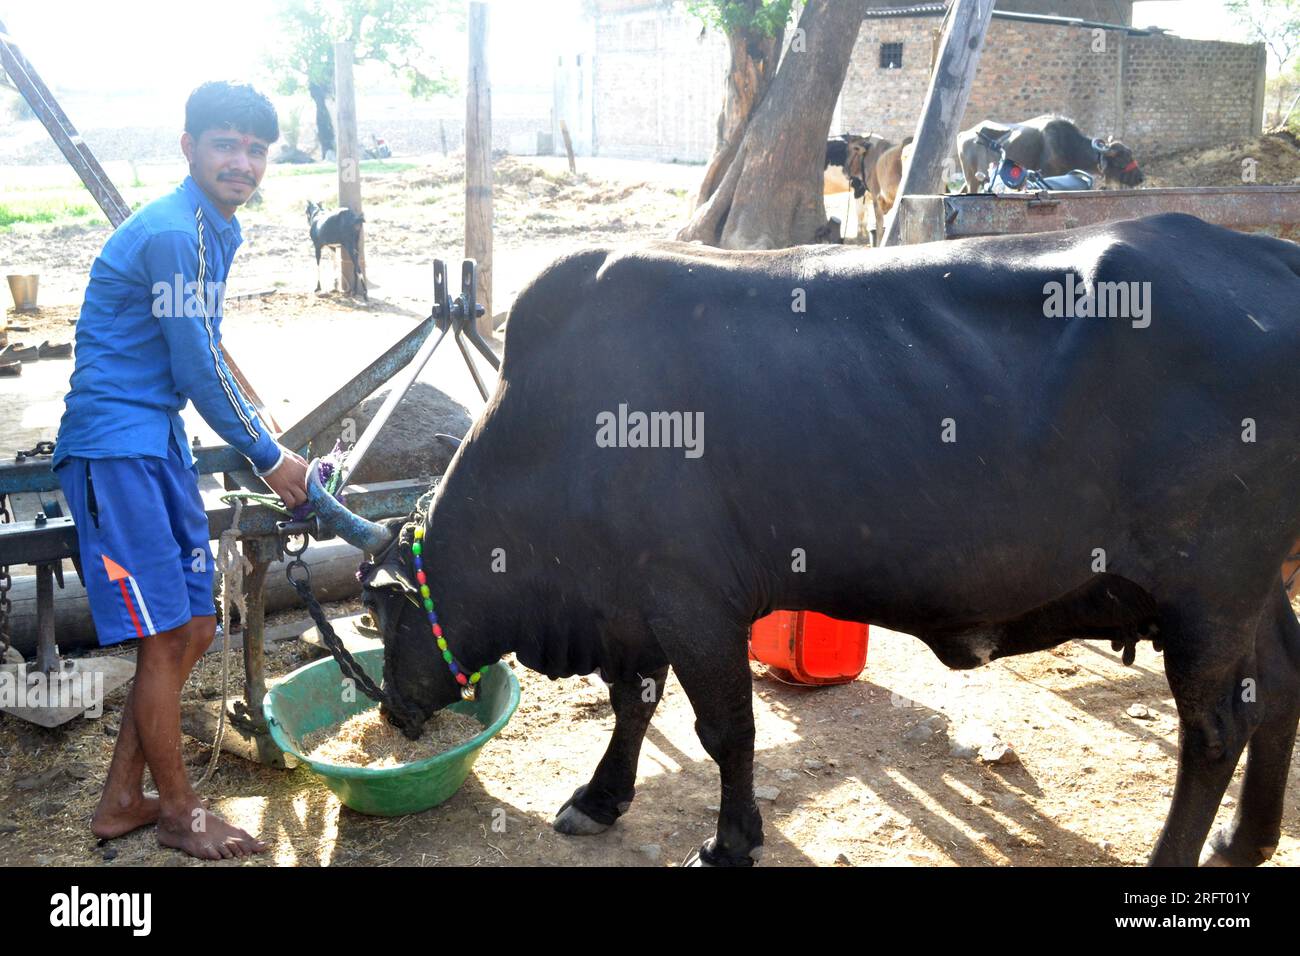 12-05-2021 Indore, M.P. India. Young Indian farmer giving grass to a black cow, Indian rural scene Stock Photo